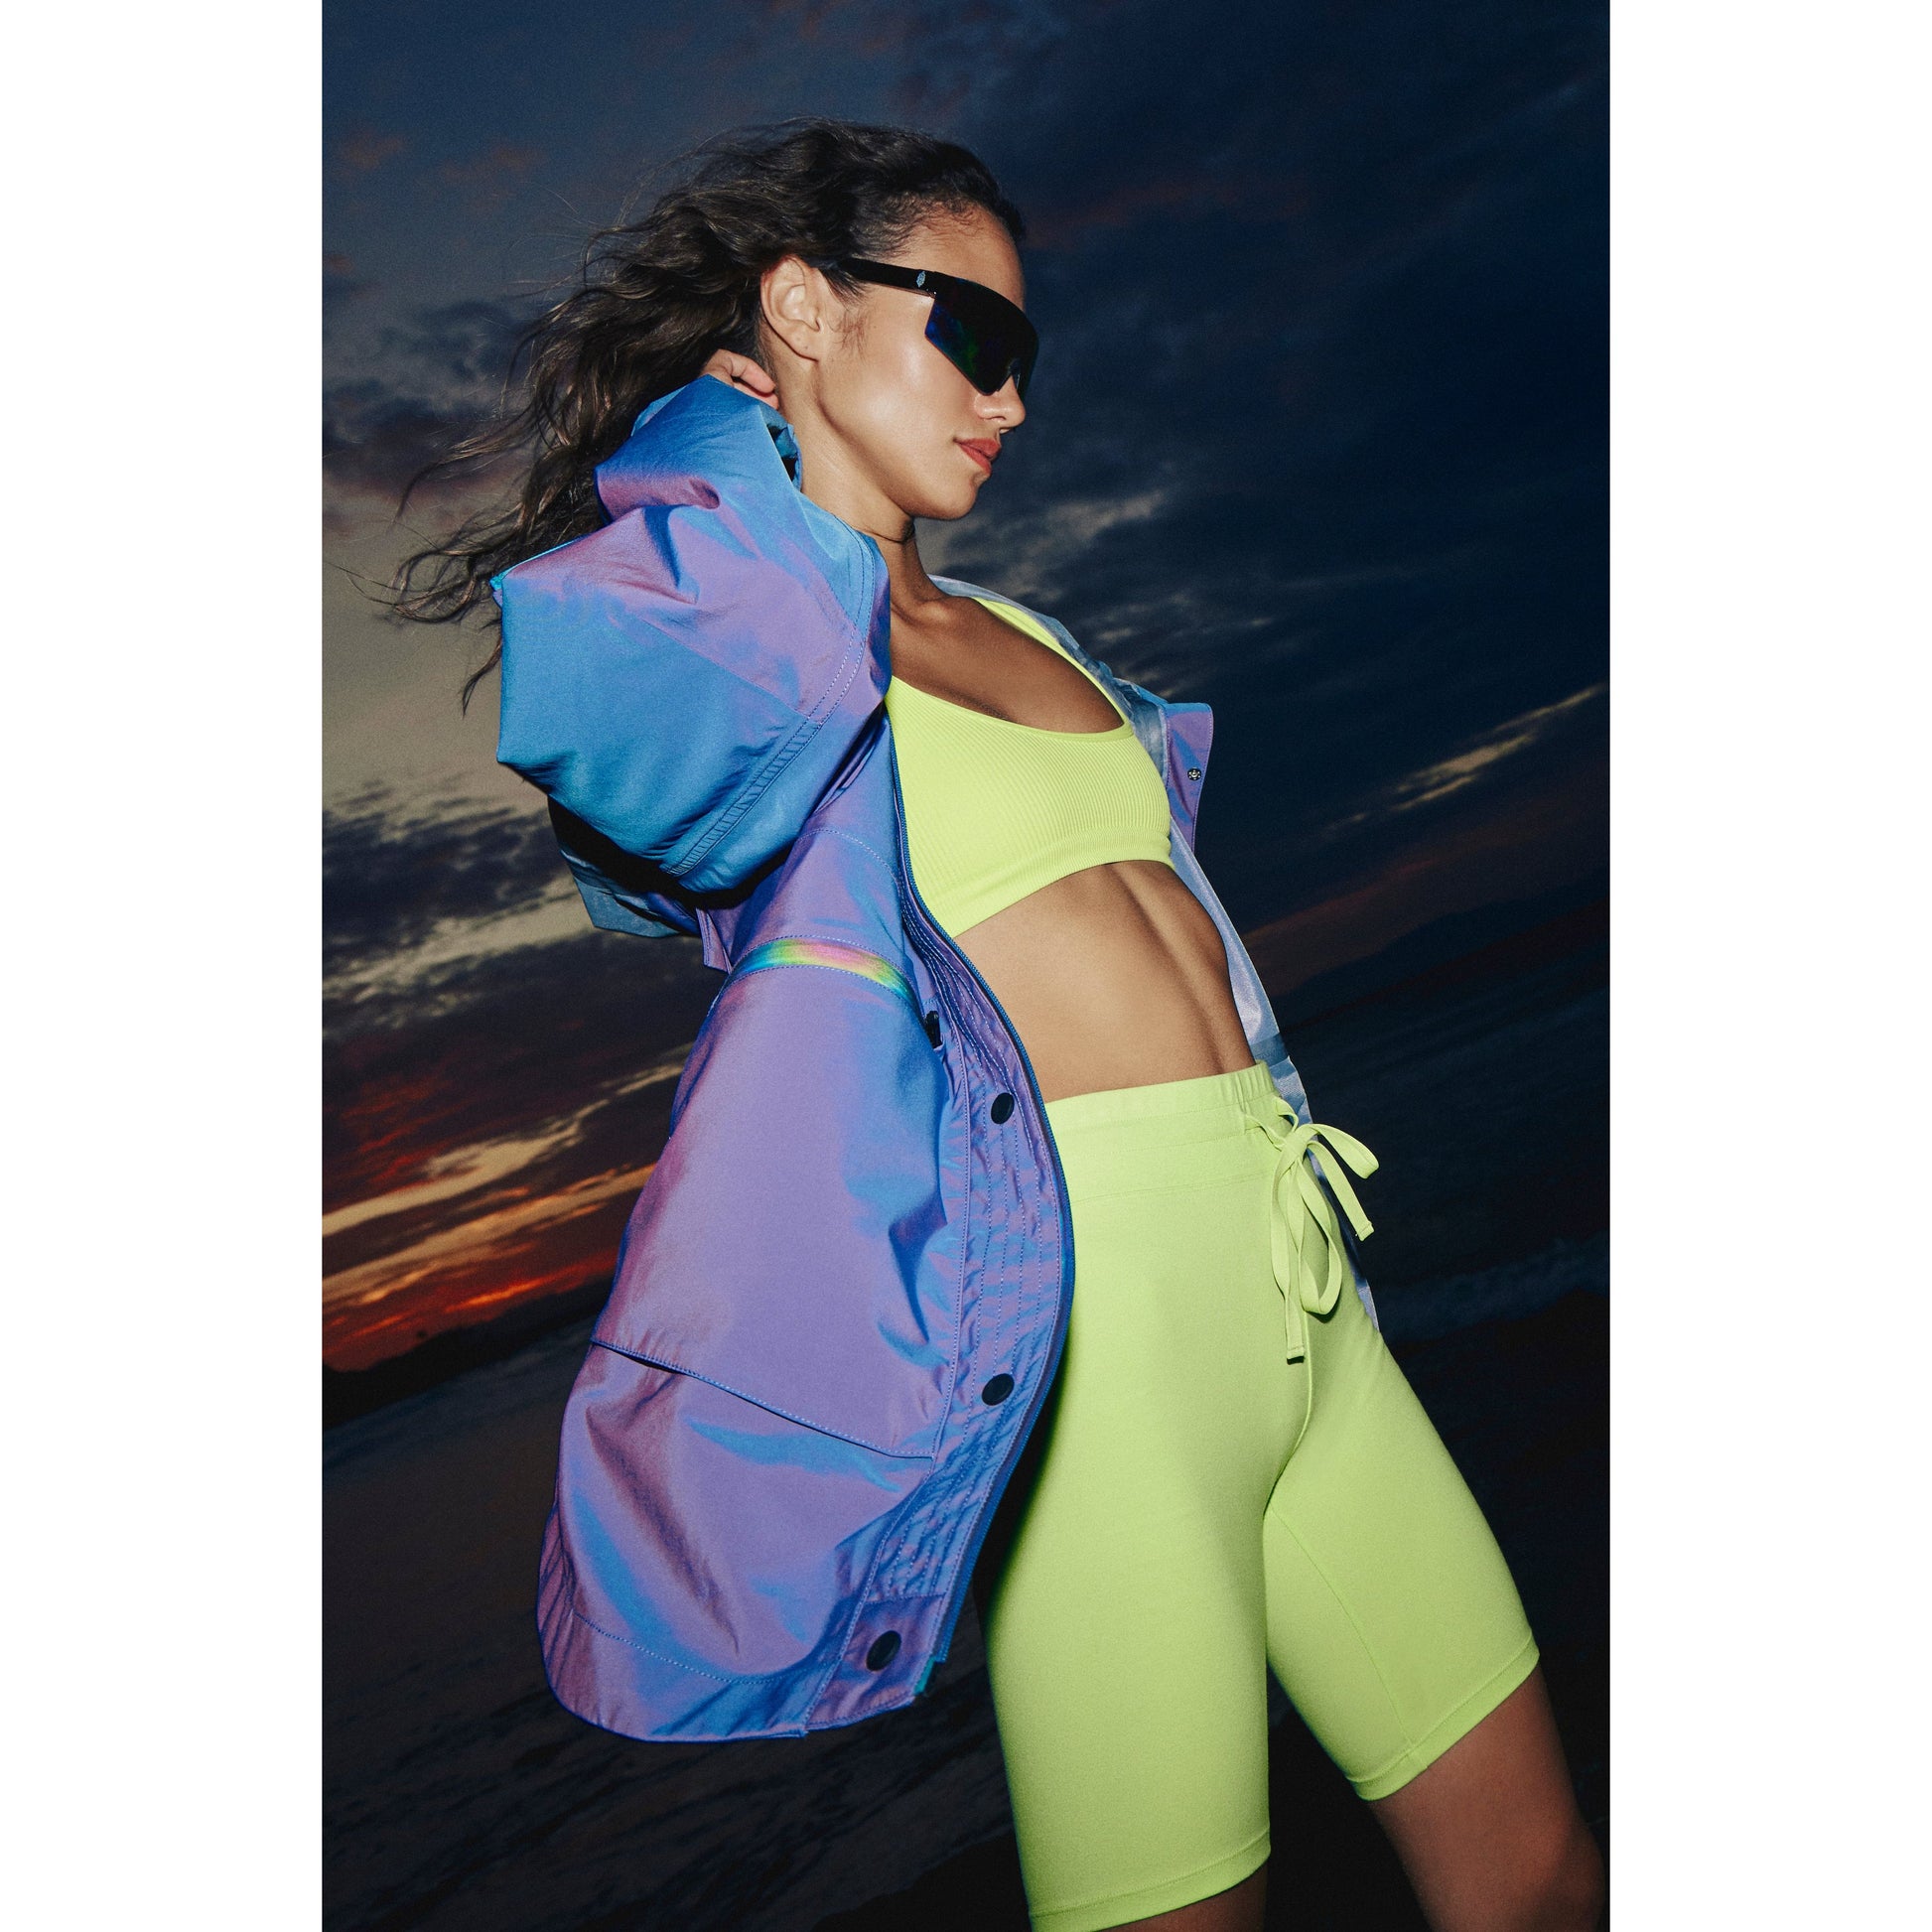 A woman in a Singin in the Rain Jacket, Iridescent Blue Iris by Free People Movement and sunglasses poses against a sunset sky.